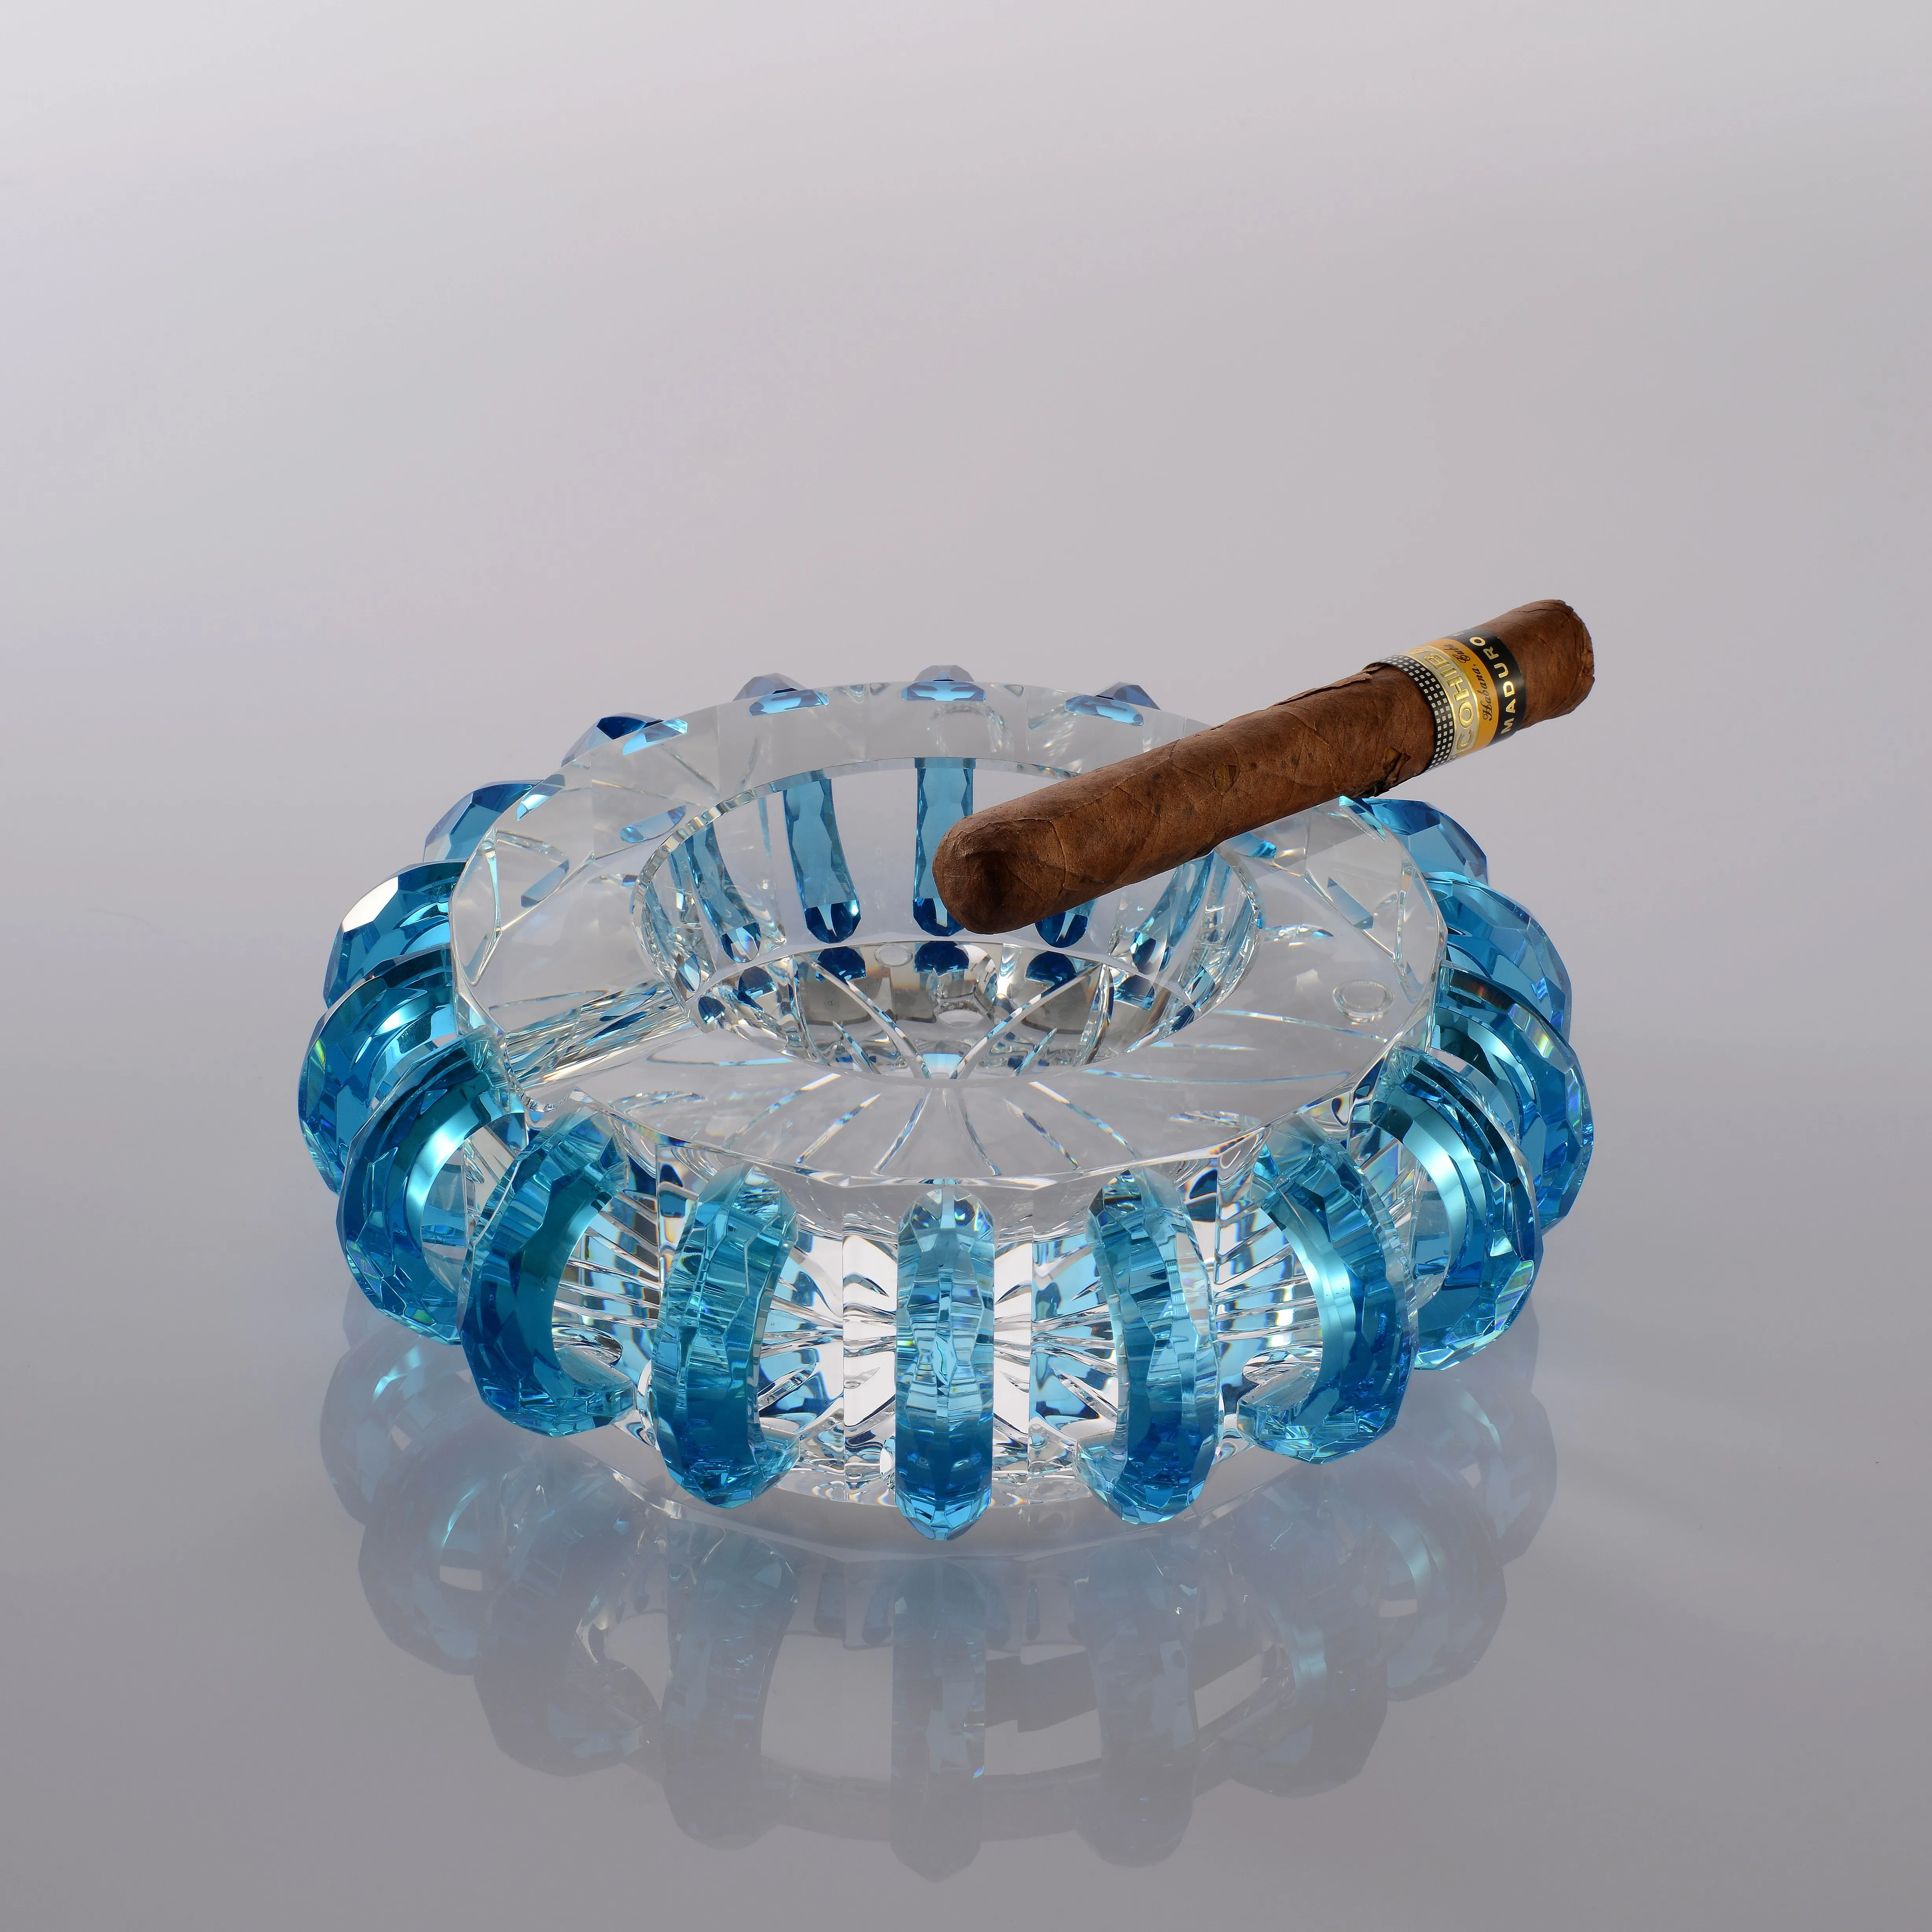 Ashtrays For Business Gift Wholesale Custom Made Large Round Crystal Glass Ashtray For Business Gift